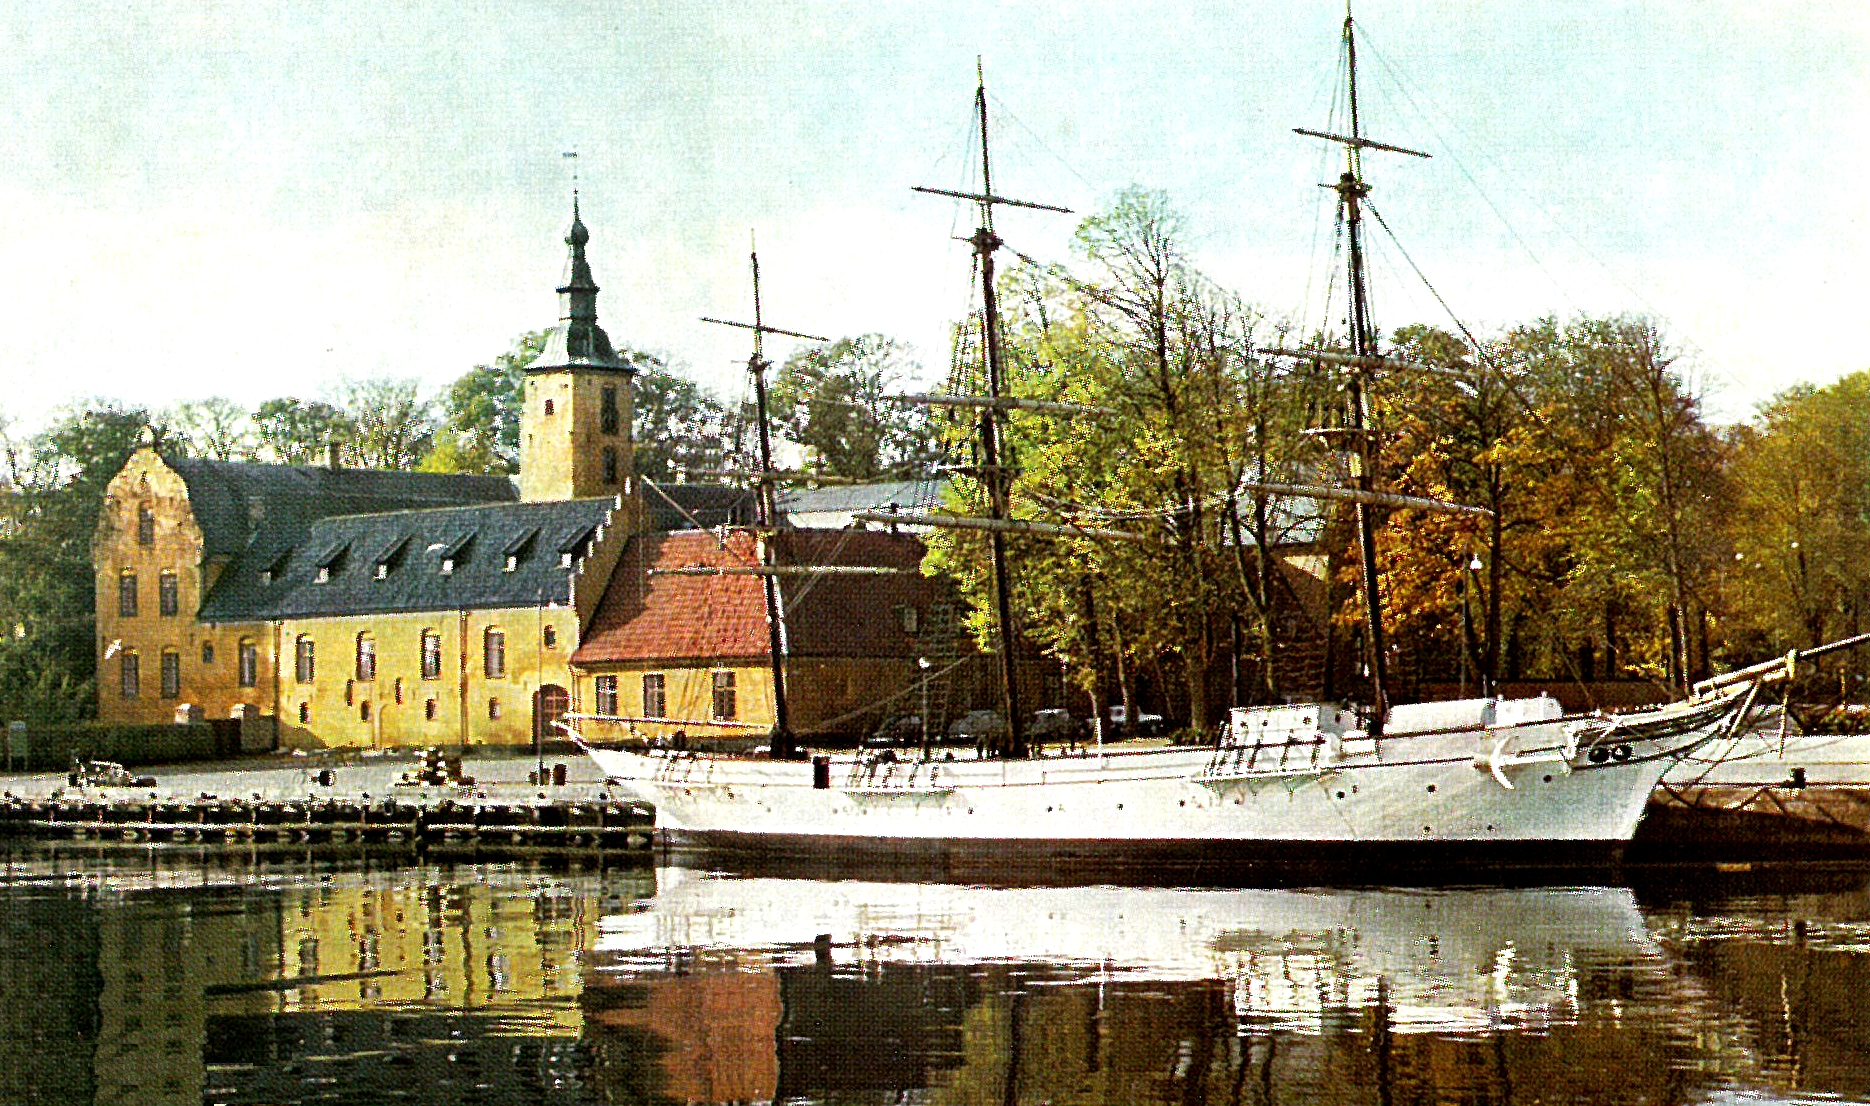 Halmstad castle and ship